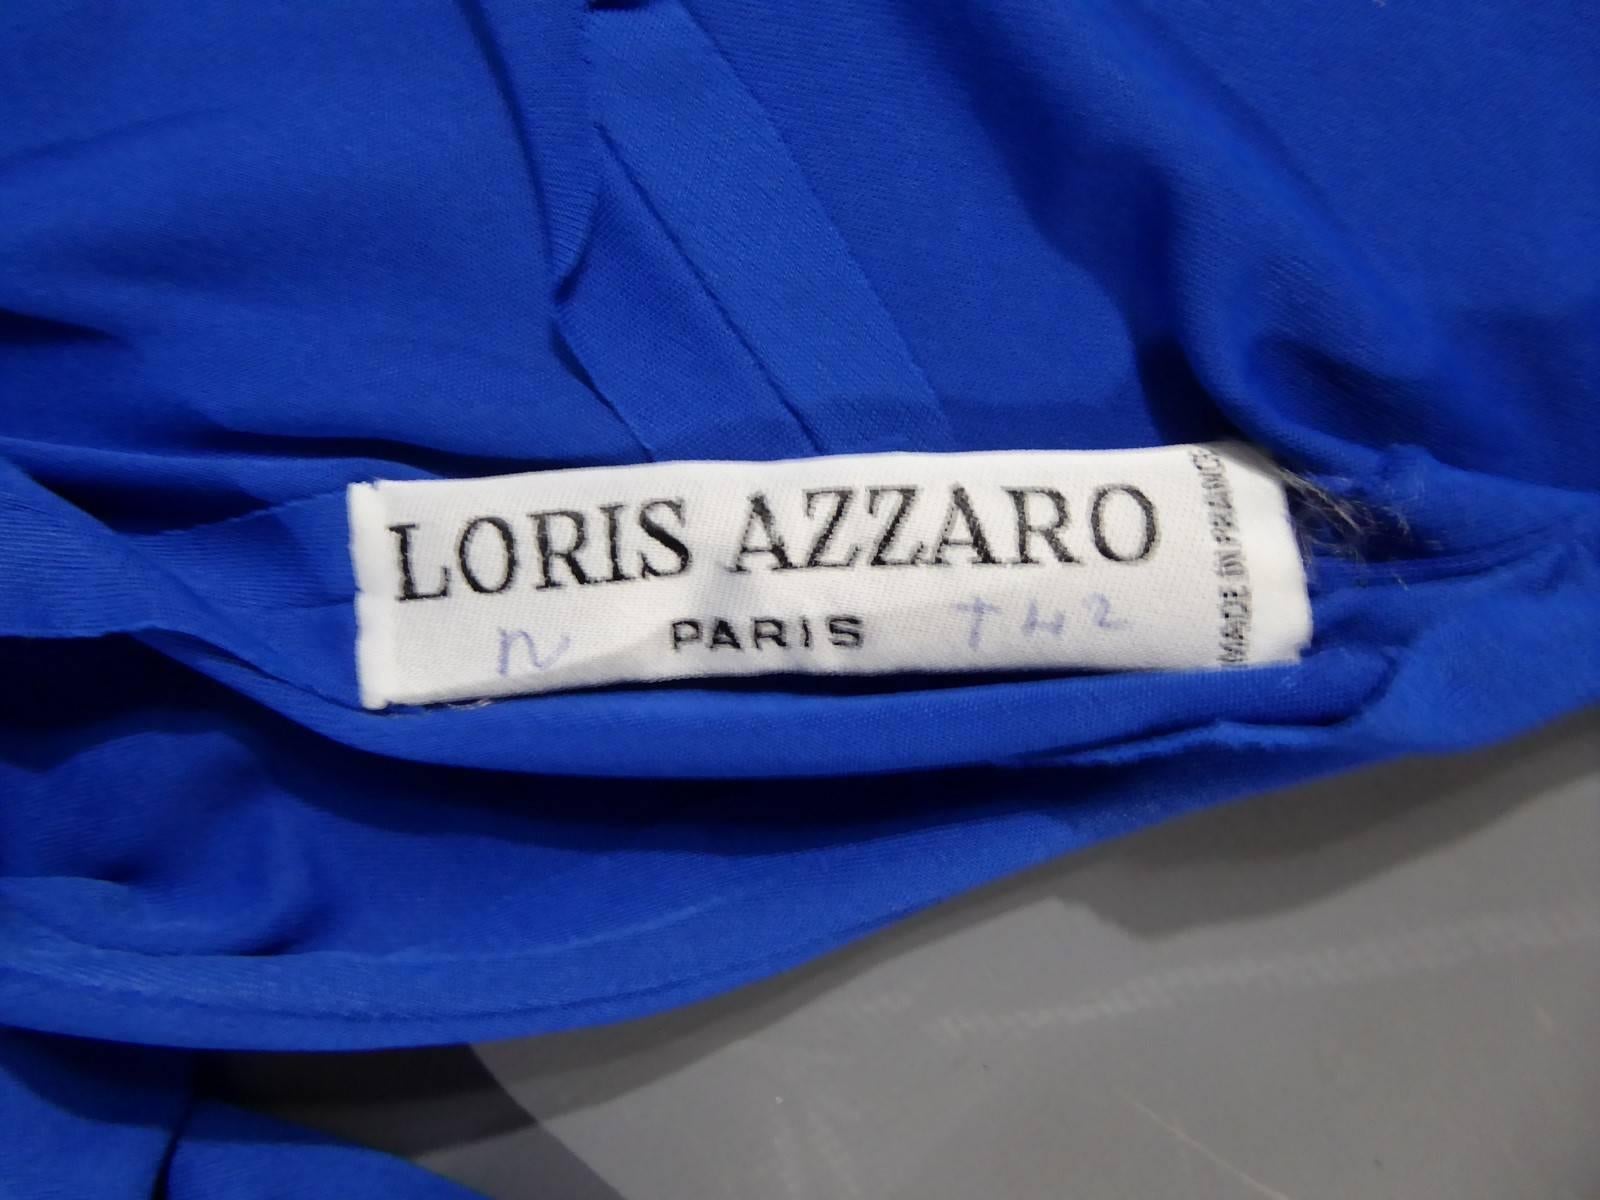 Circa 1990

France

Beautiful Haute Couture evening dress by Loris Azzaro Paris dating from the nineties. Long dress in electric blue mate Lycra. Large shoulder pads and mao collar in assorted sequins. Long sleeves. The dress is backless in an oval